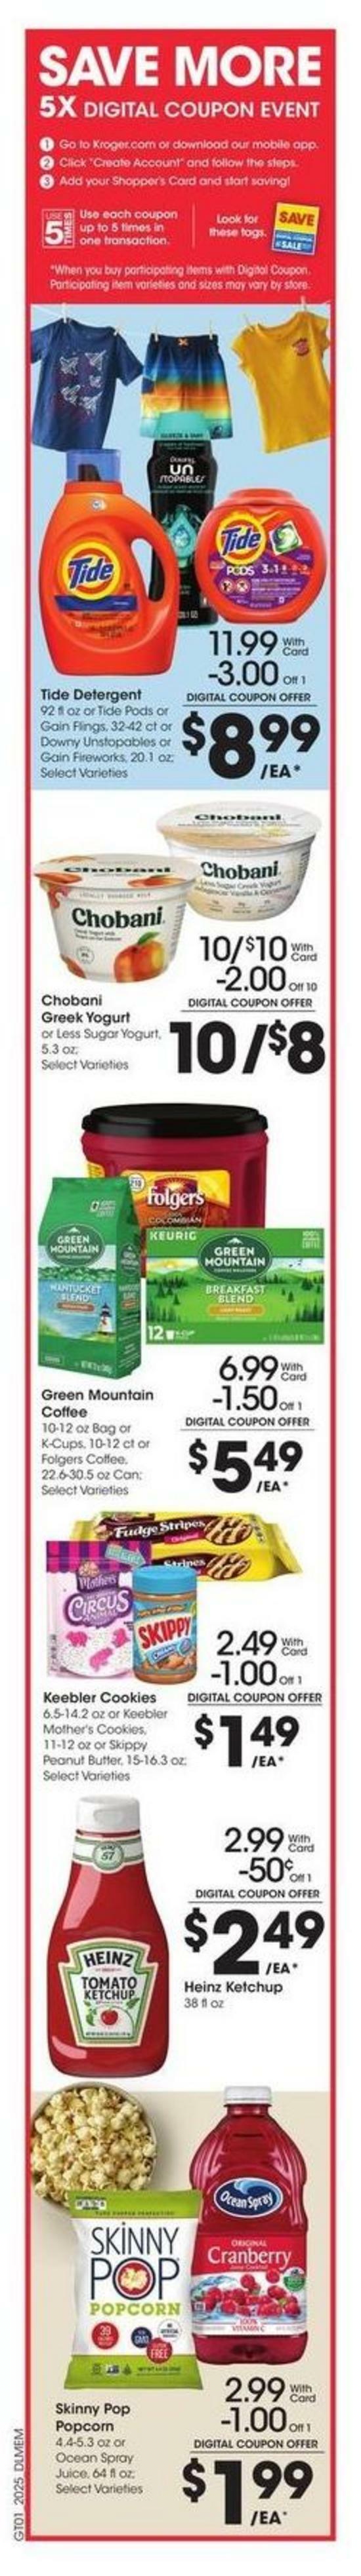 Kroger Weekly Ad from July 22